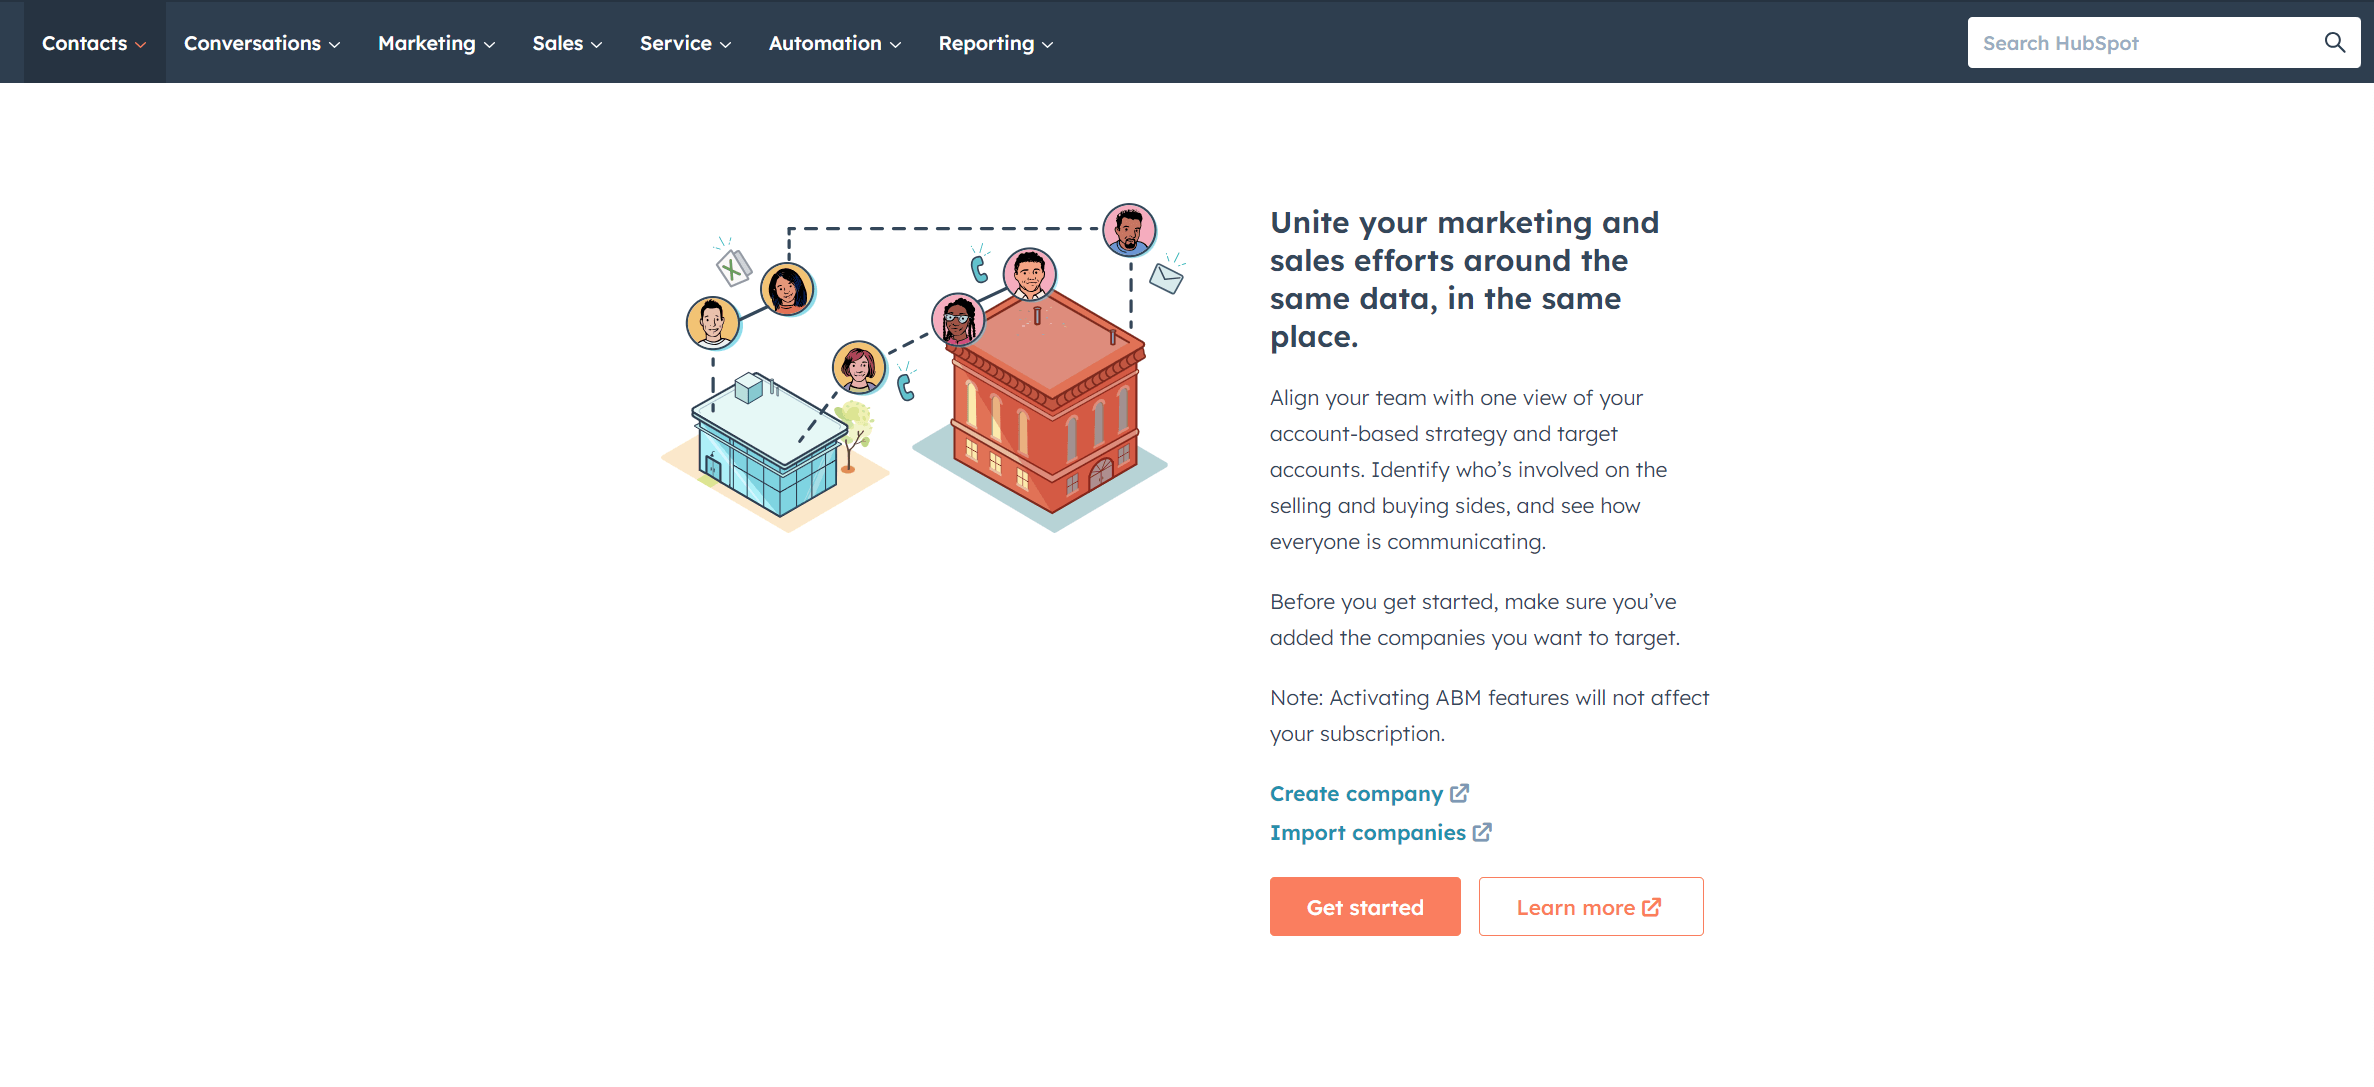 HubSpot's Target Account setup screen highlighting tools for unifying marketing and sales data for strategic account-based management.